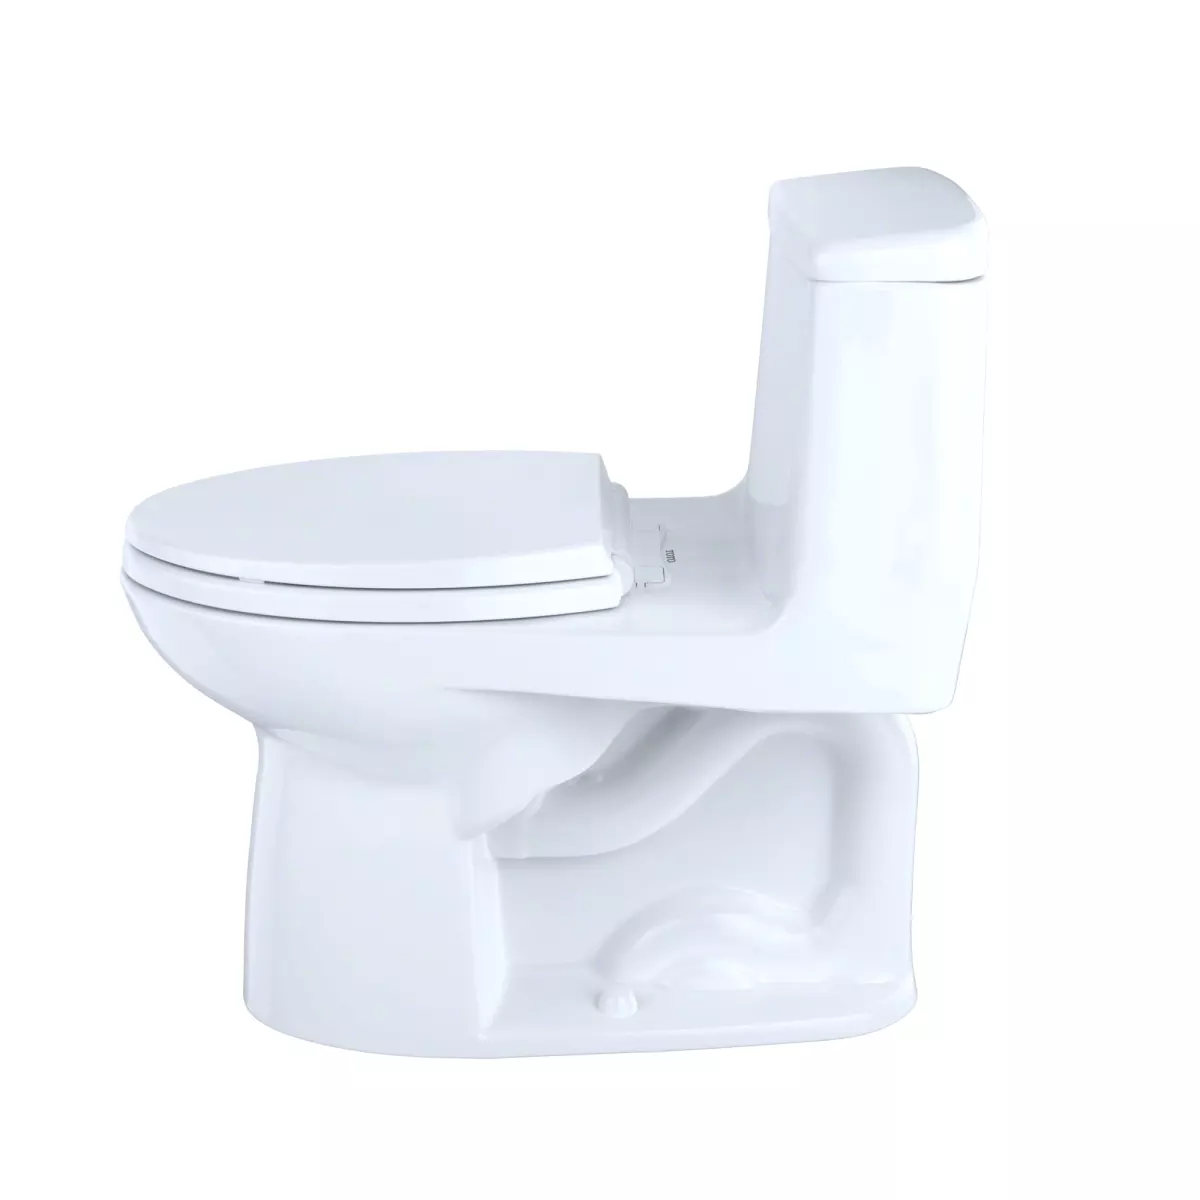 Toto MS854114S#11 - UltraMax One-Piece Elongated 1.6 GPF Toilet, Colonial White